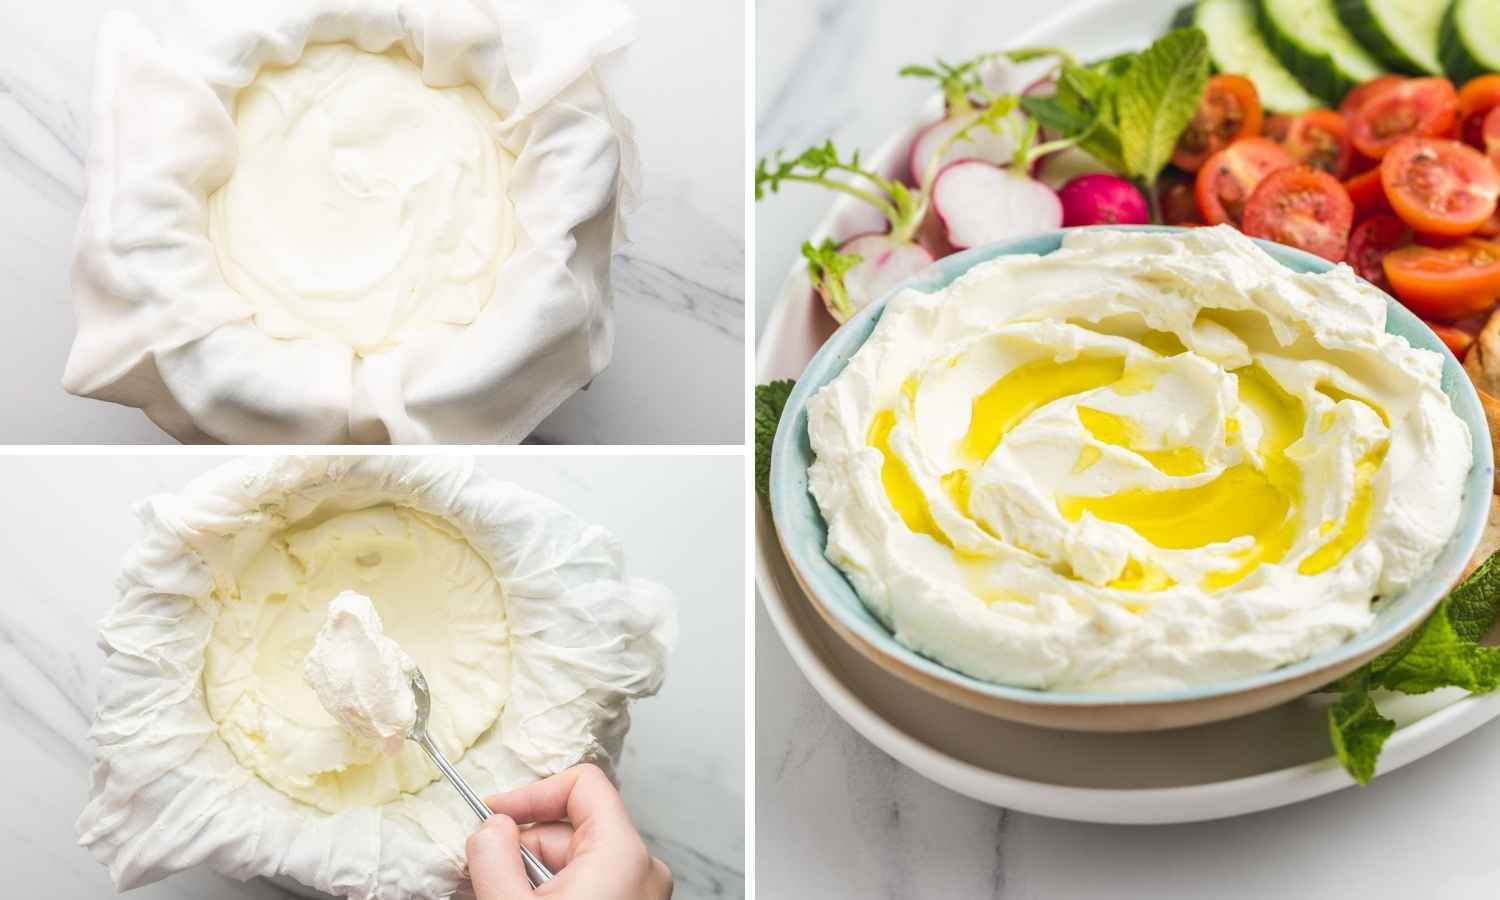 Steps how to make labneh.